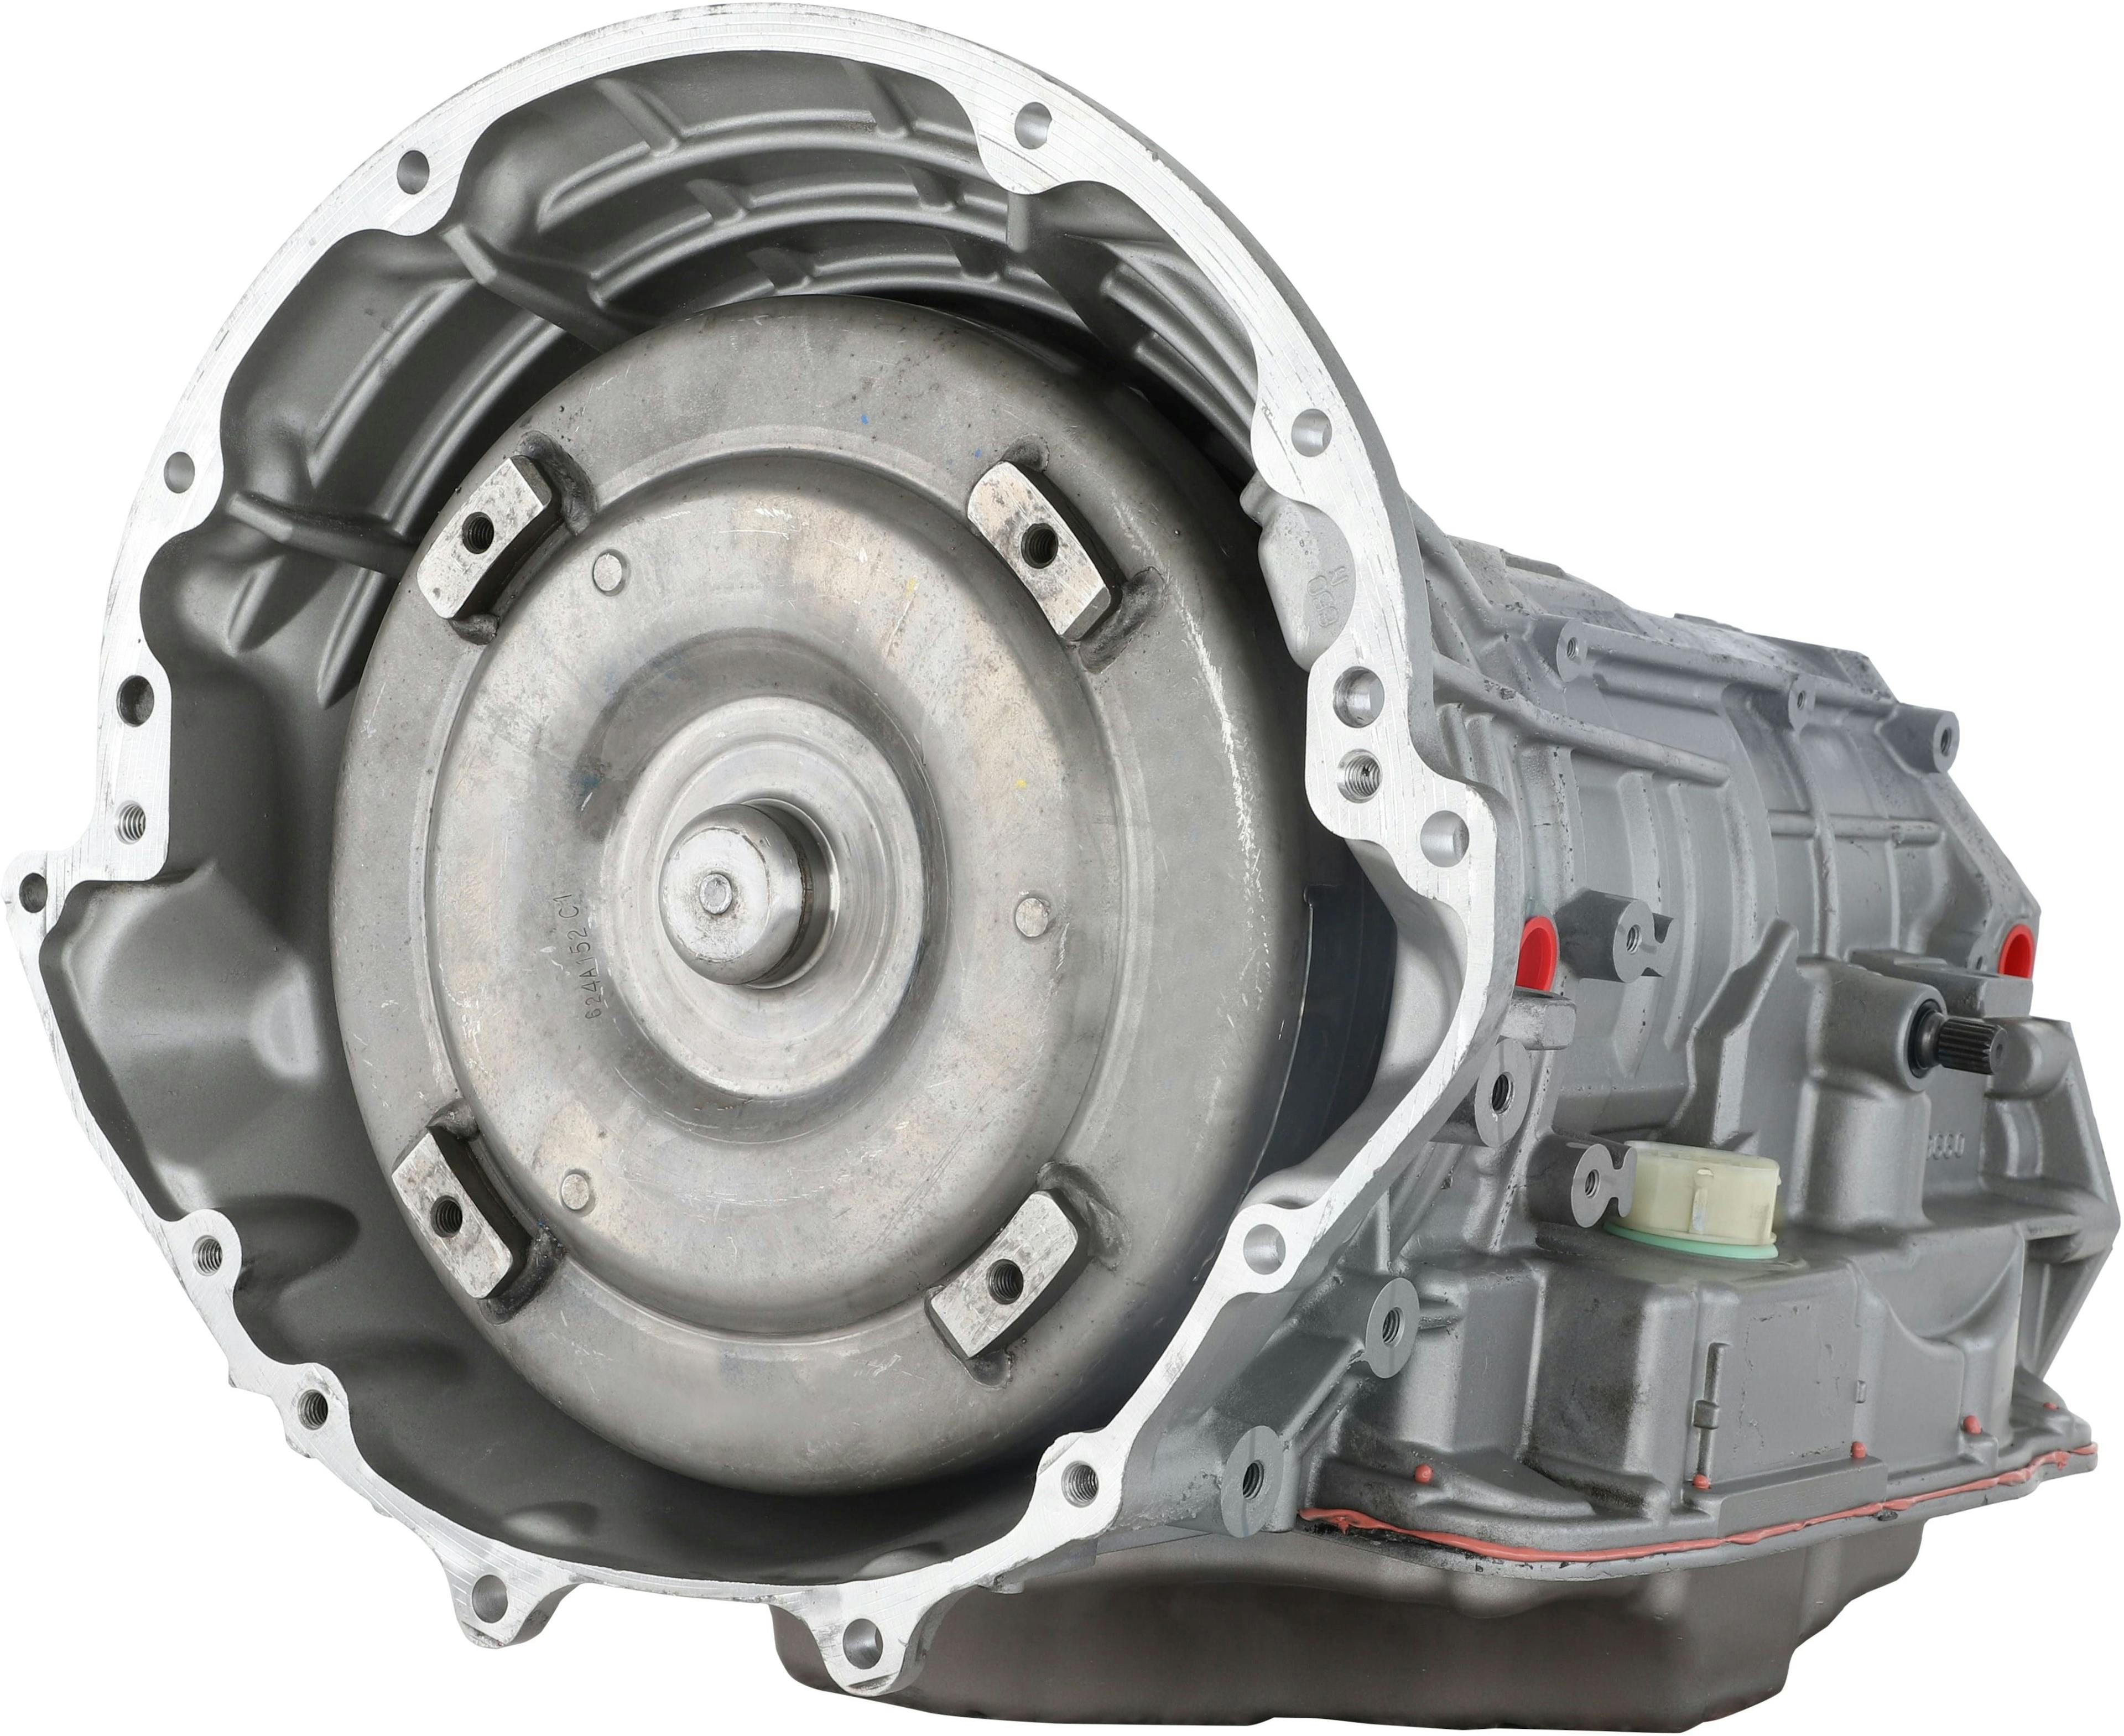 Automatic Transmission for 2012-2013 Dodge Durango/Ram 1500 and Jeep Grand Cherokee 4WD with 4.7/5.7L V8 Engine